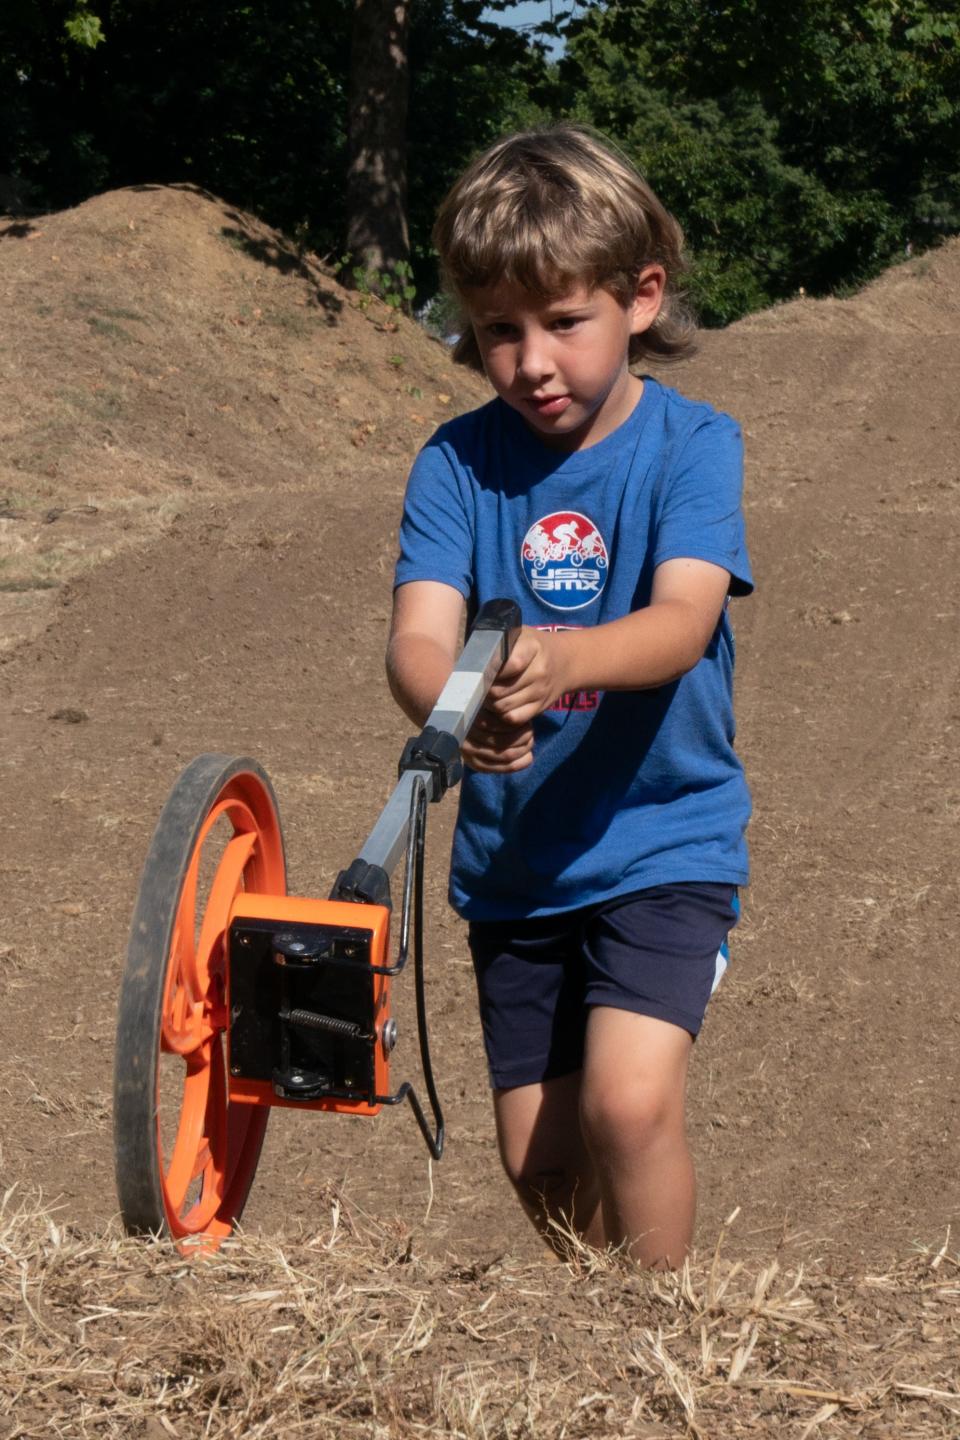 Connor Grist, 5, helps measure distances using a rolling measuring device, as he and other volunteers work Sept. 2 at Topeka's Heartland BMX, 4801 S.W. Shunga Drive in Crestview Park.